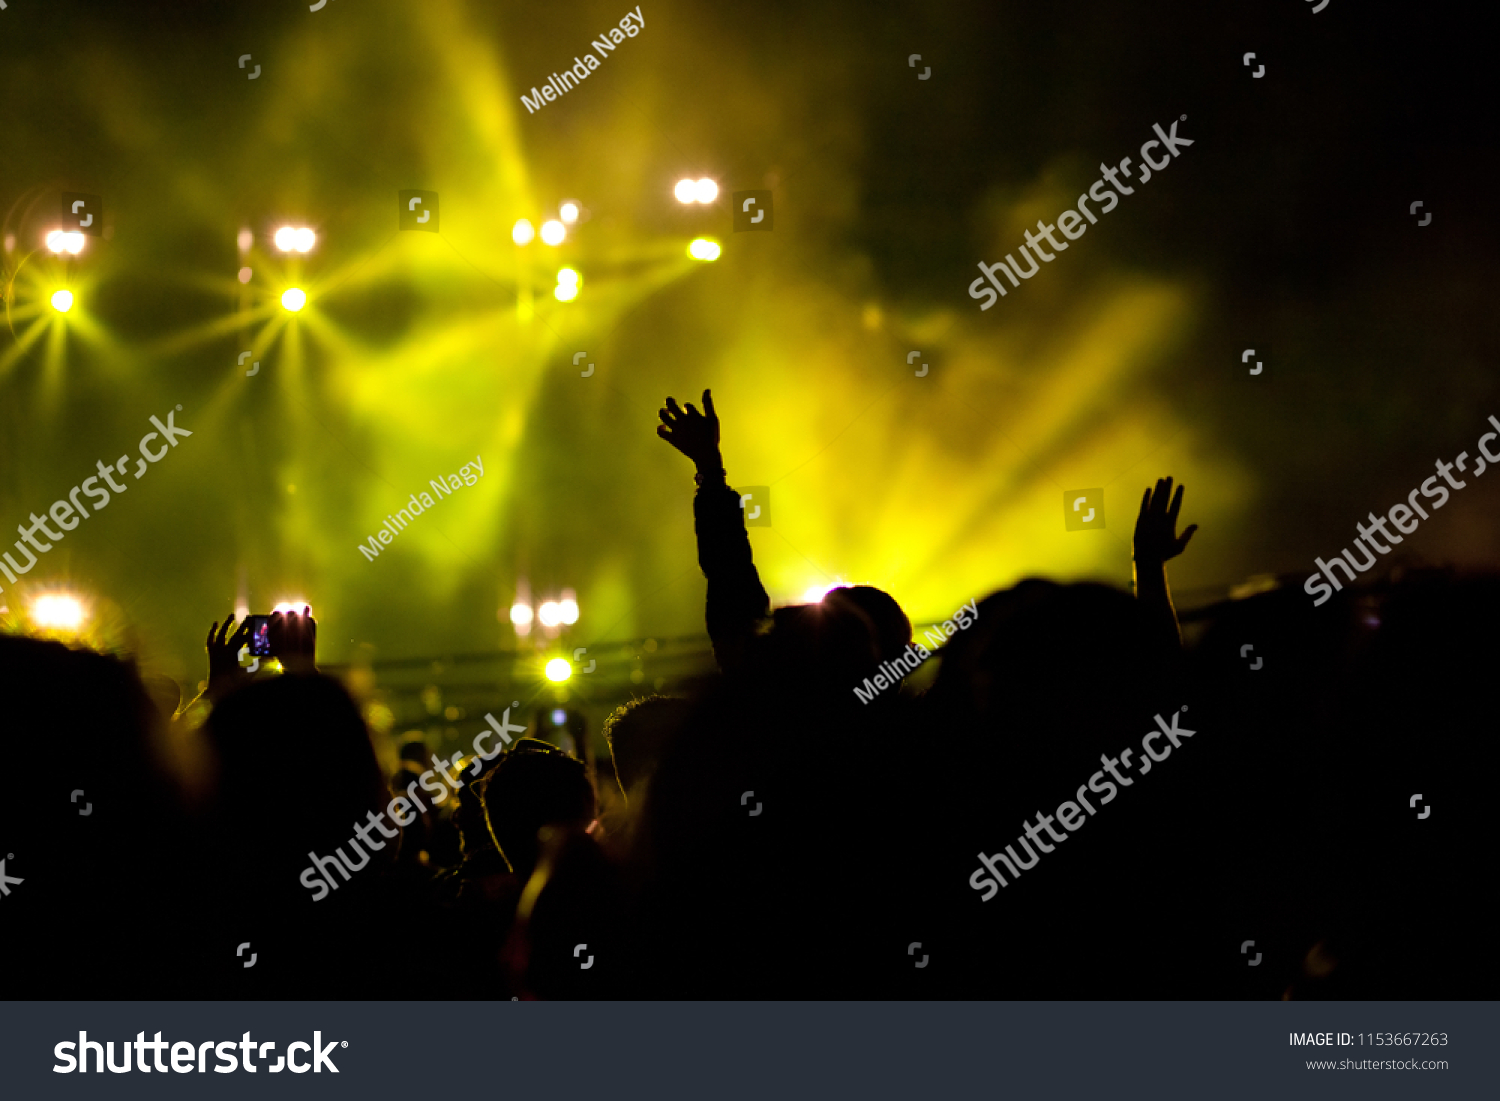 cheering crowd with raised hands at concert - music festival #1153667263